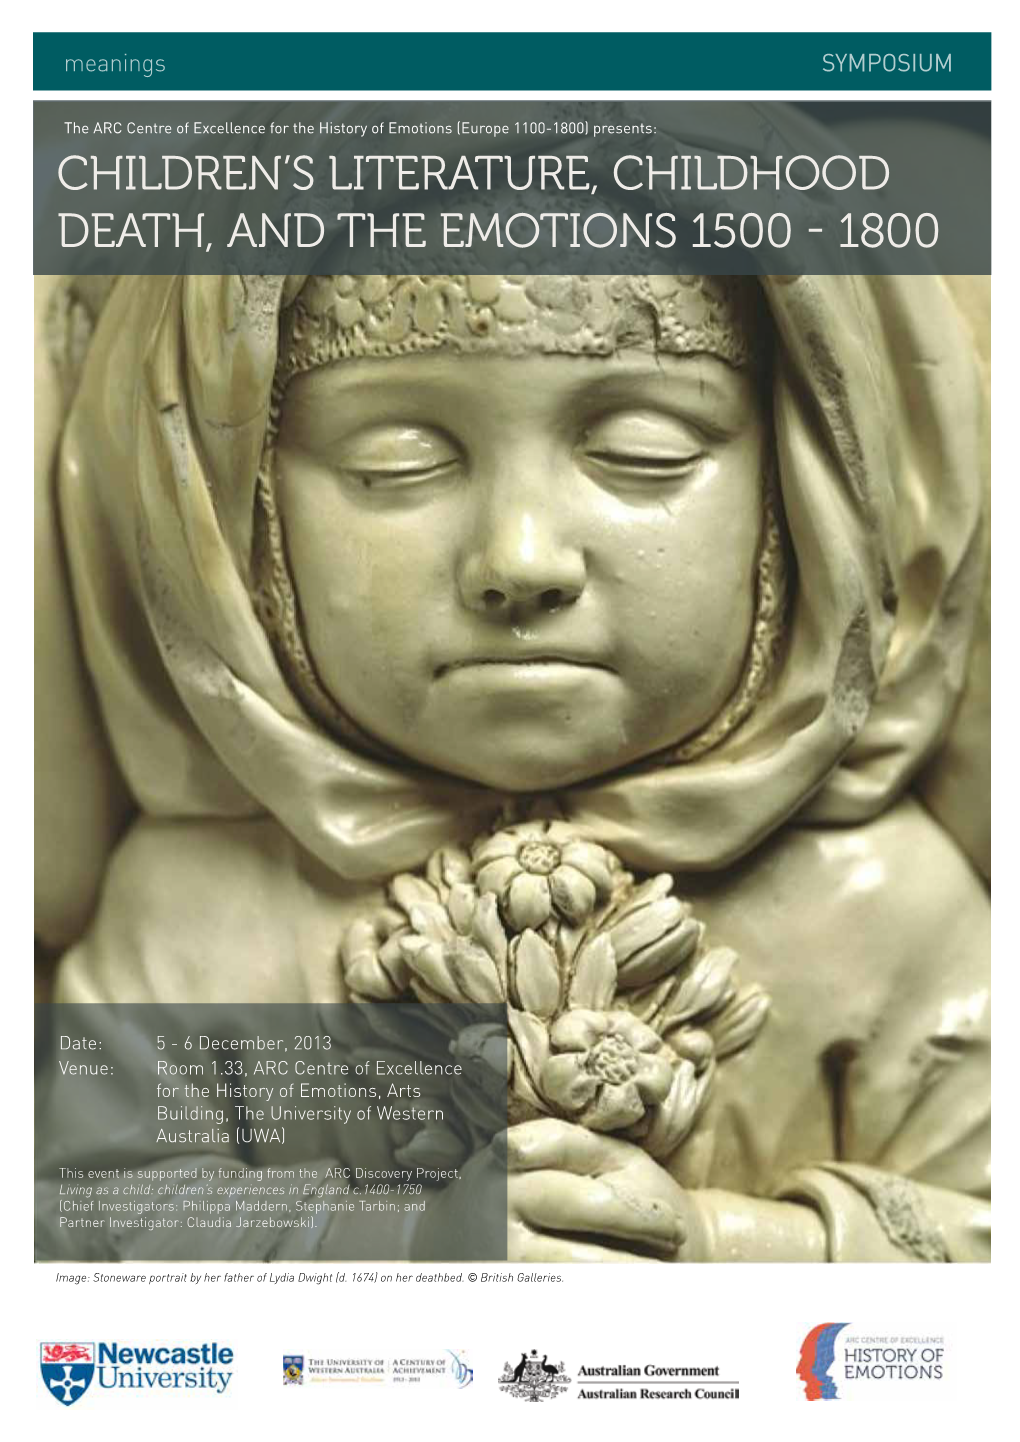 Children's Literature, Childhood Death, and the Emotions 1500